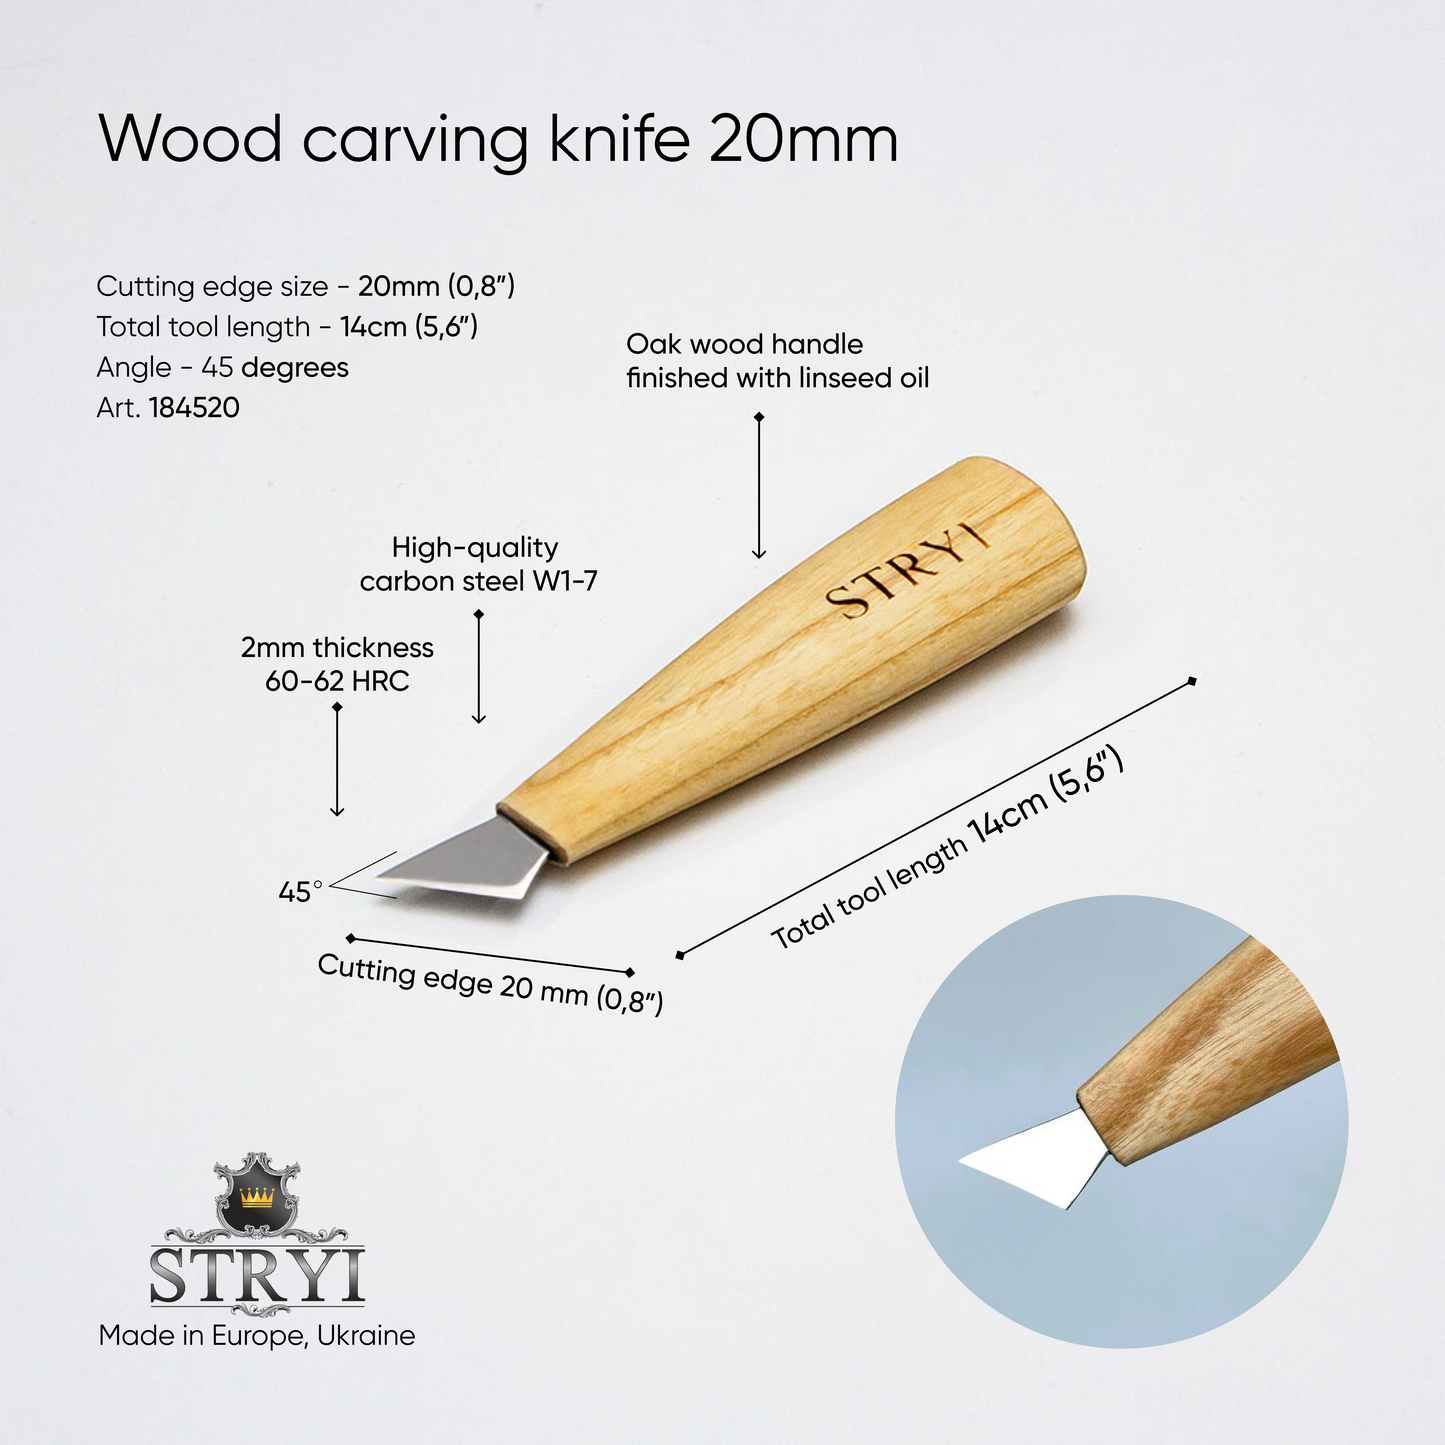 Chip carving knife 20mm STRYI Profi, Carving tools, Triangle knife, Chip carving tool